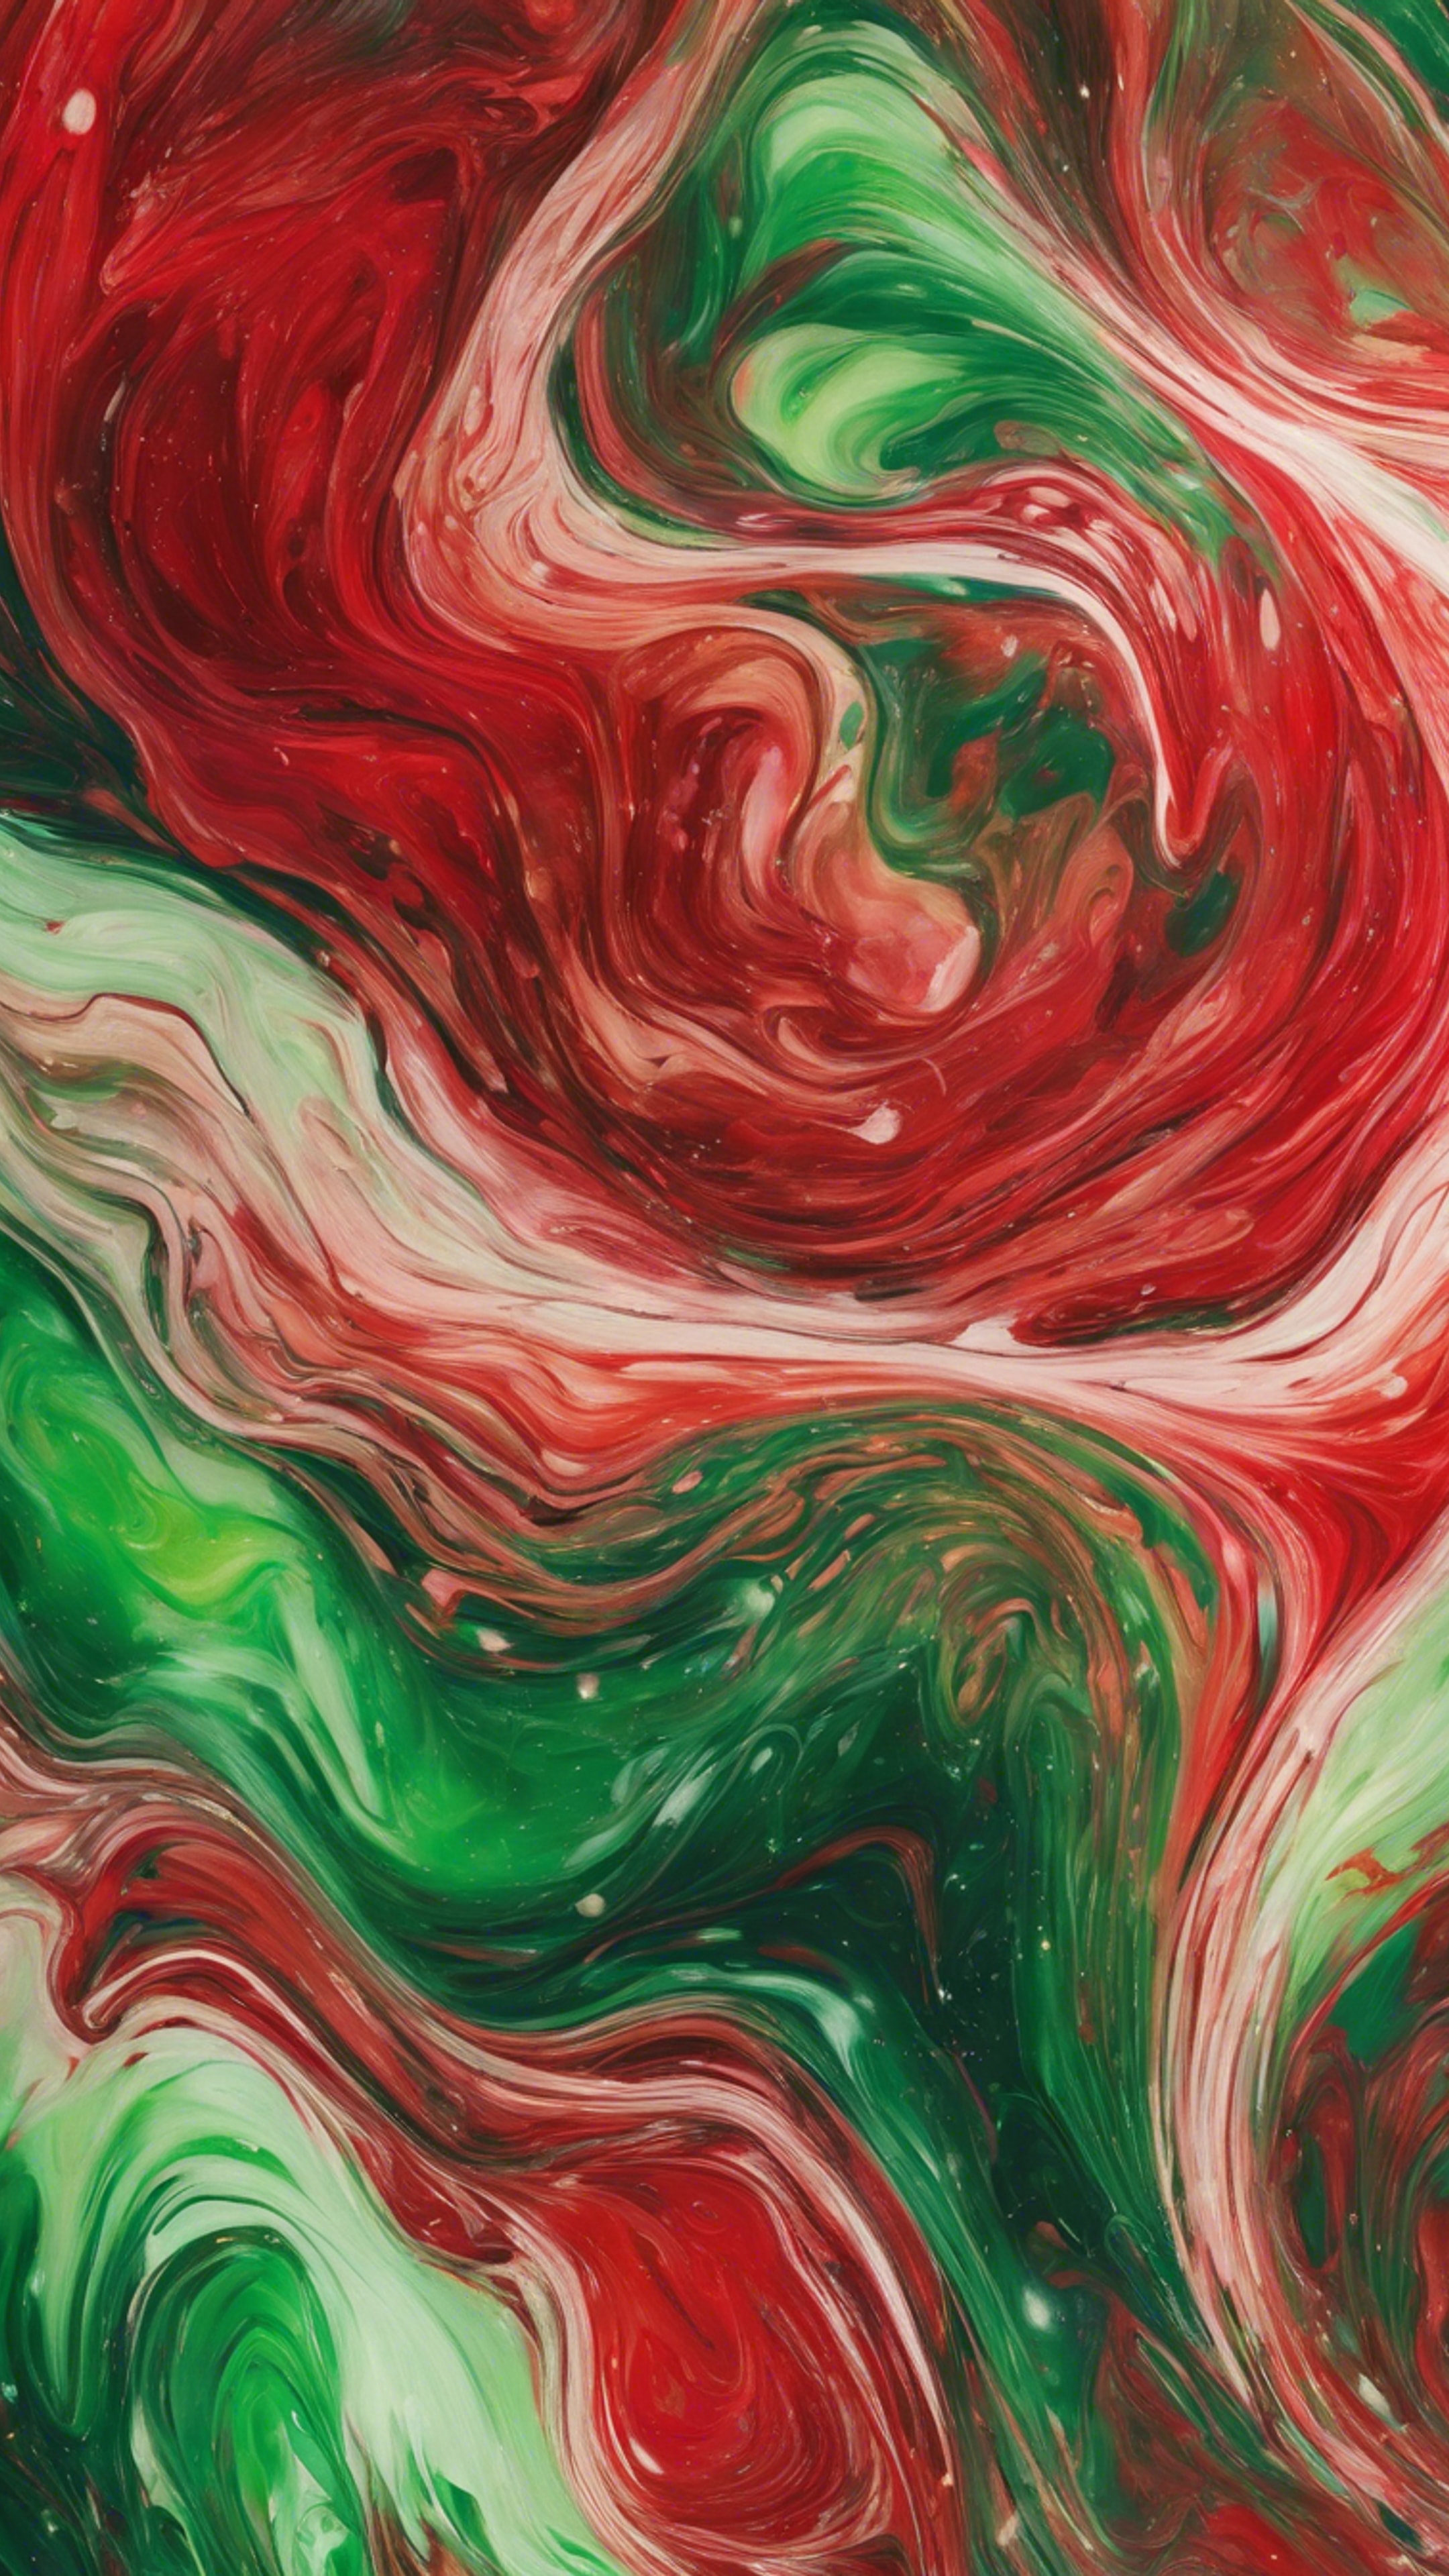 A vivid painting of swirling red and green abstract patterns טפט[5978fc4bccef4bcc8a58]